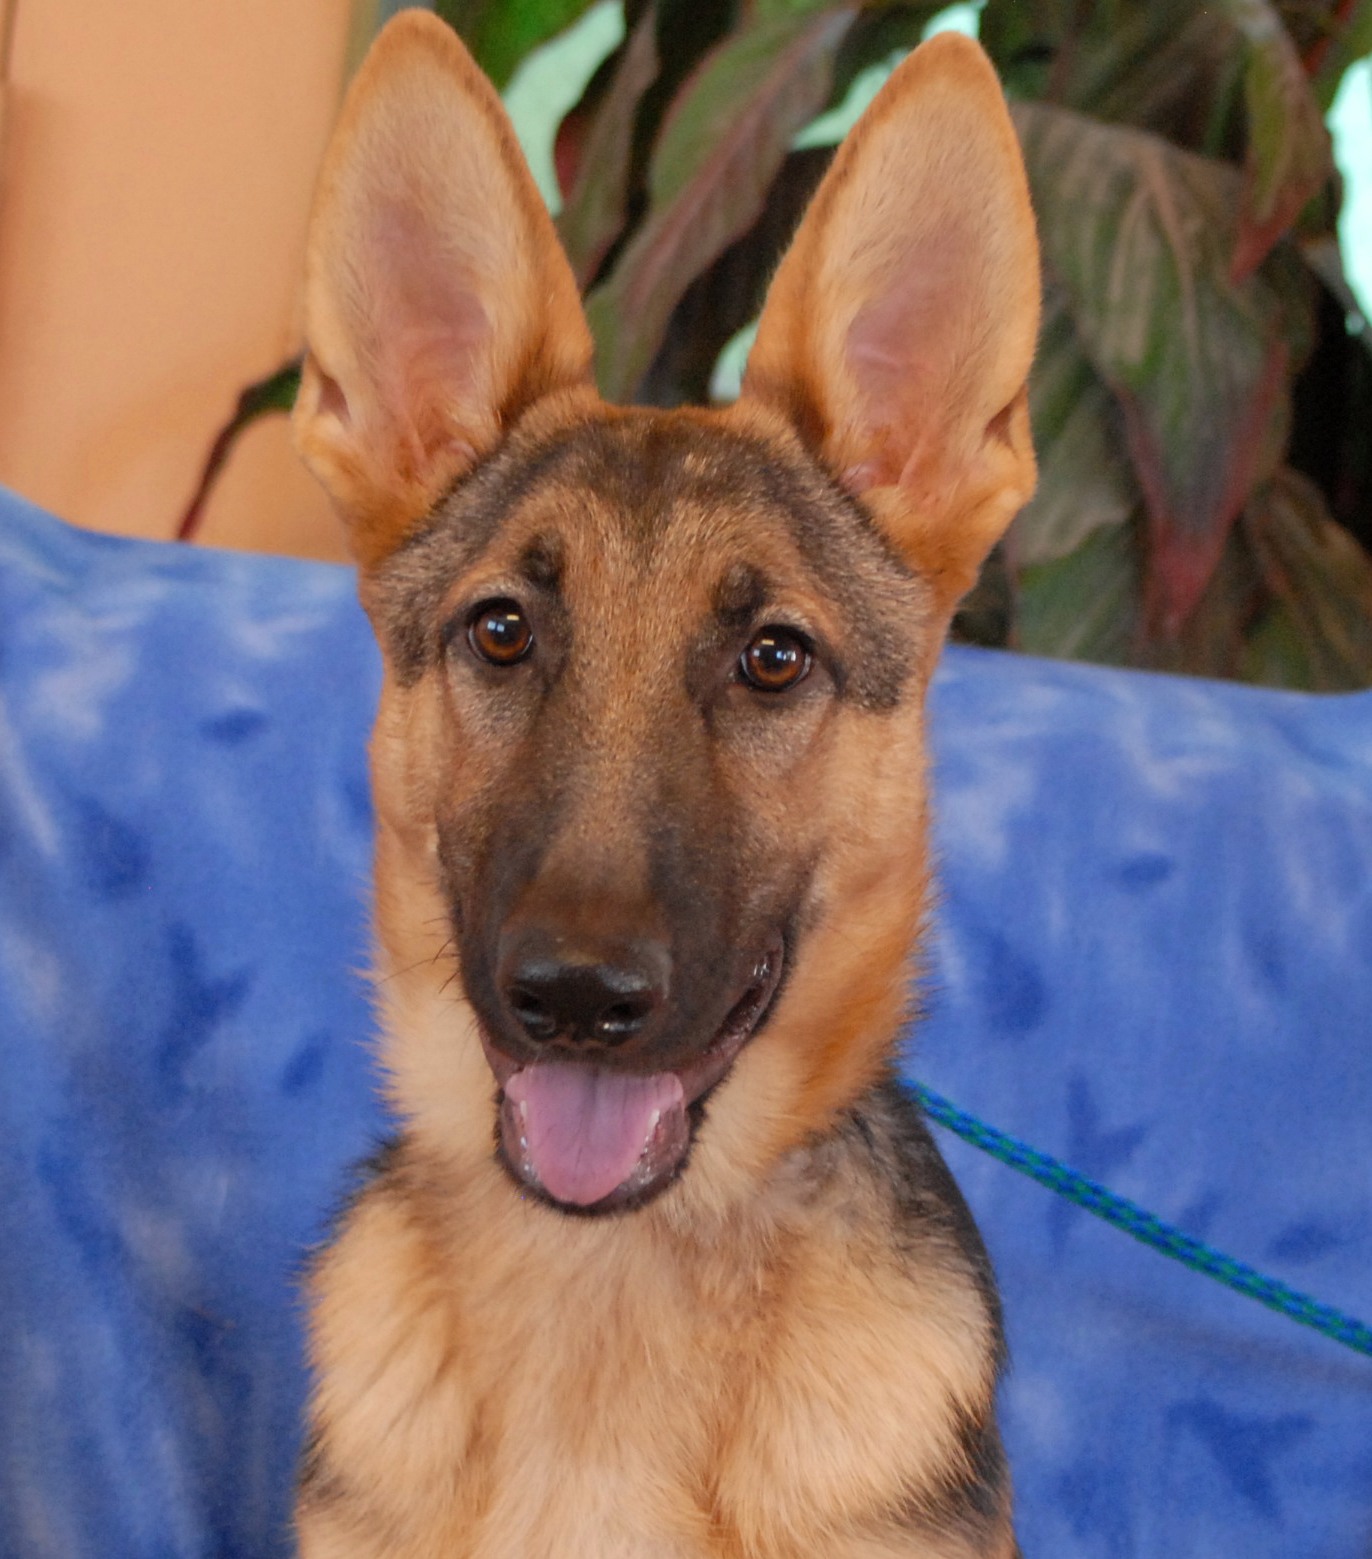 Colt, an adorable German Shepherd puppy debuting for